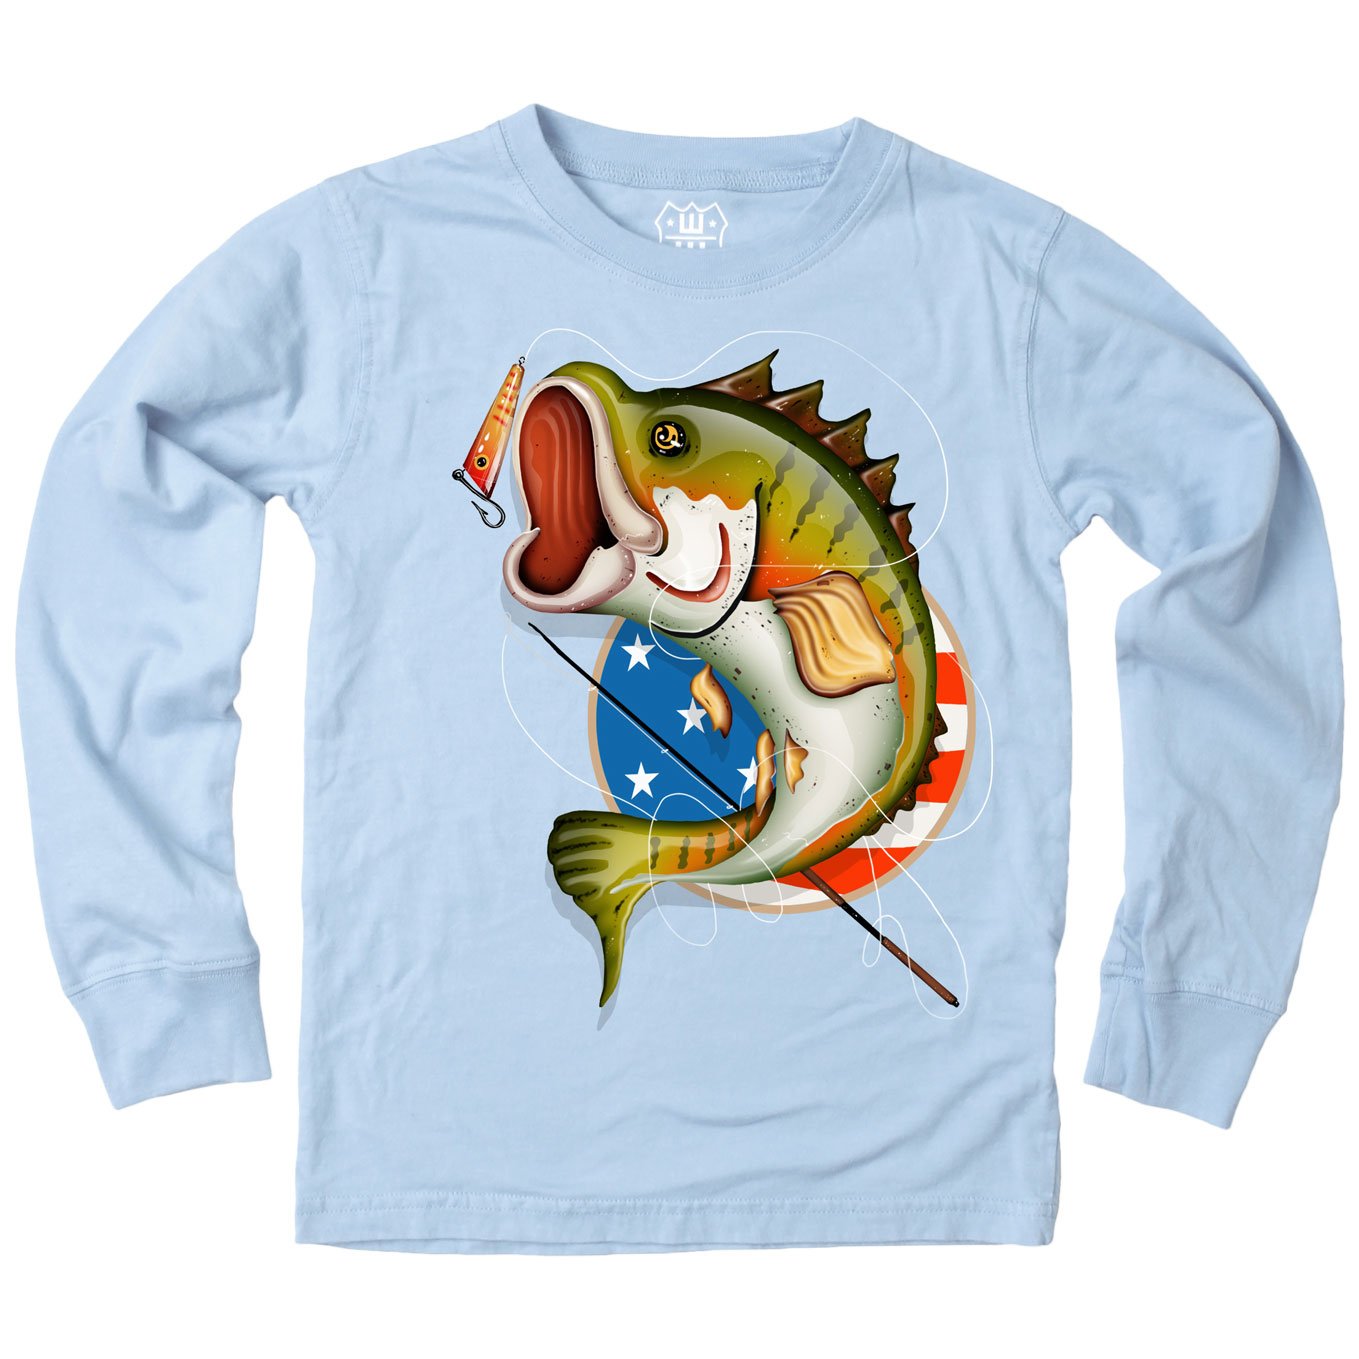 Boys Fish Out of Water Shirt by Wes and Willy